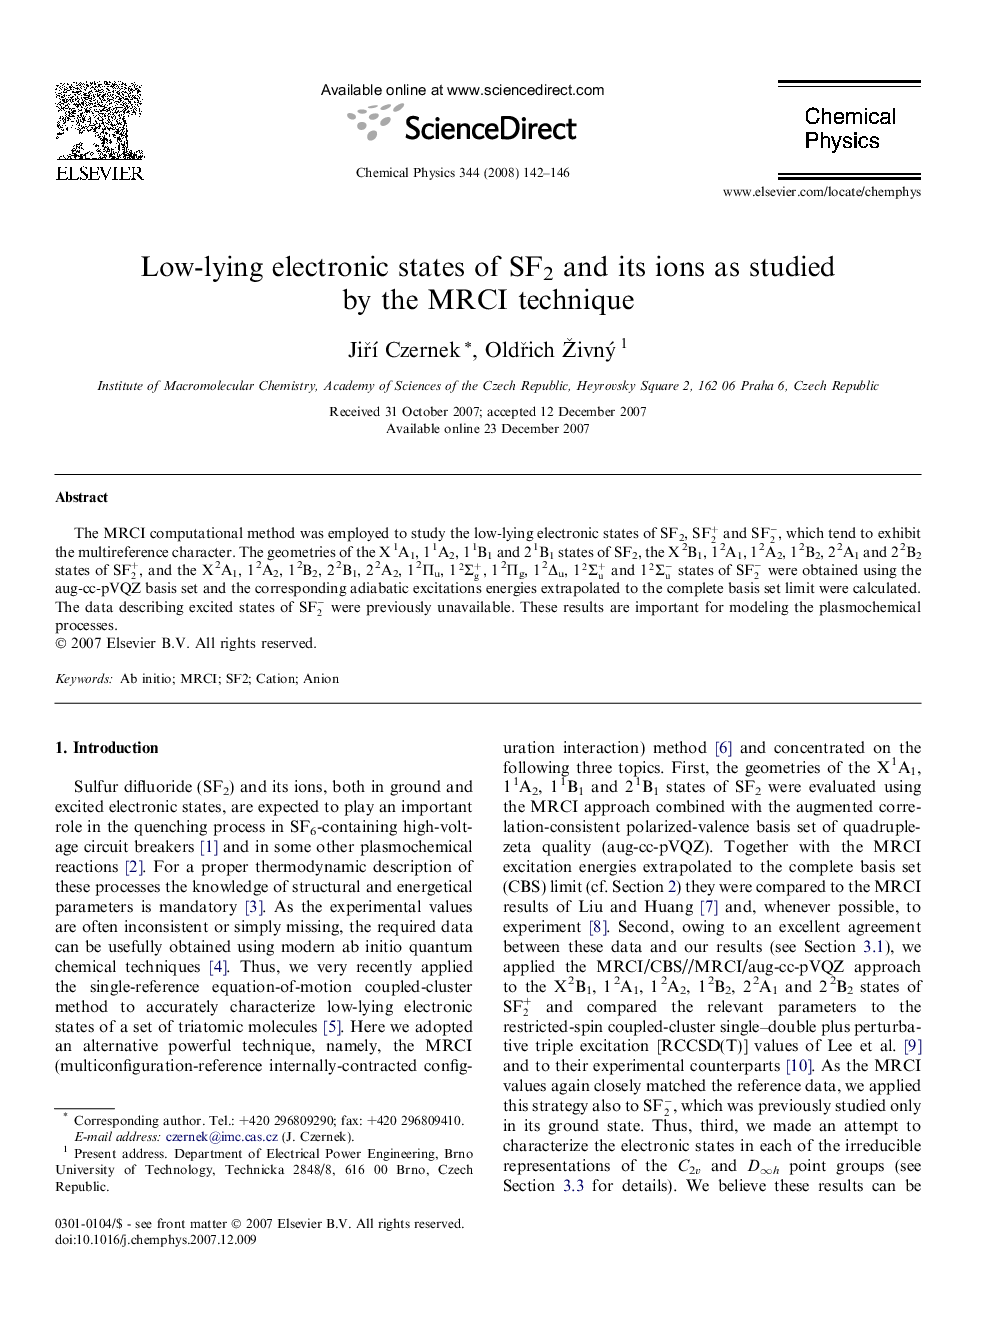 Low-lying electronic states of SF2 and its ions as studied by the MRCI technique